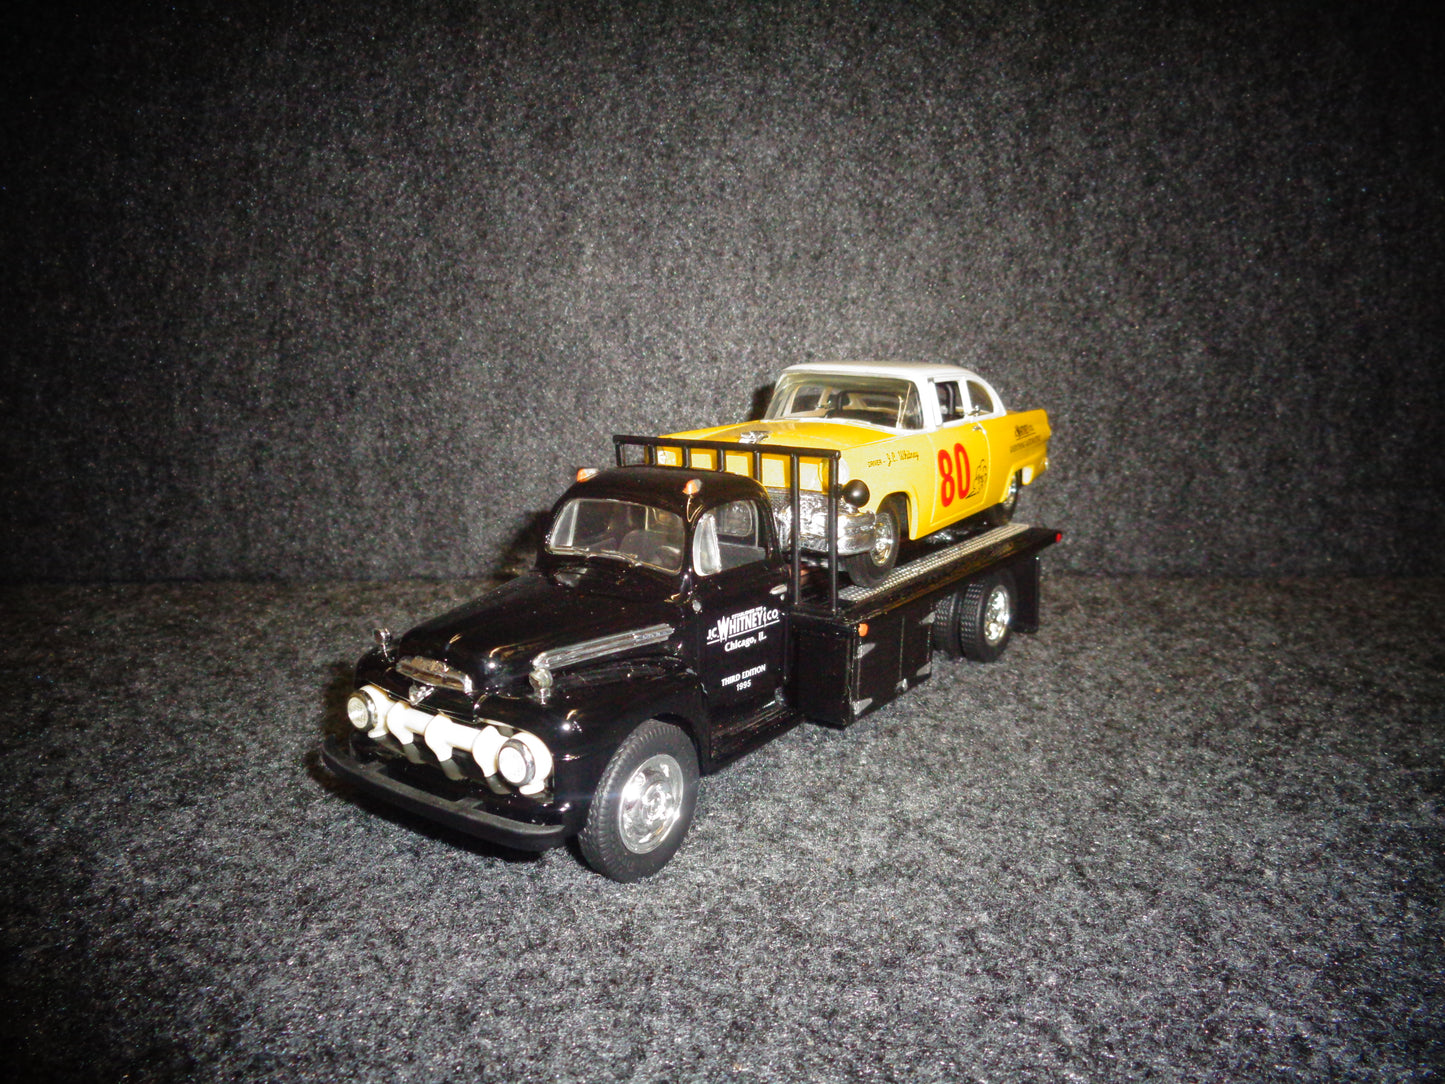 J.C. Whitney & Sons 1951 Ford F-6 Flatbed Truck & 1956 Ford Stock Car